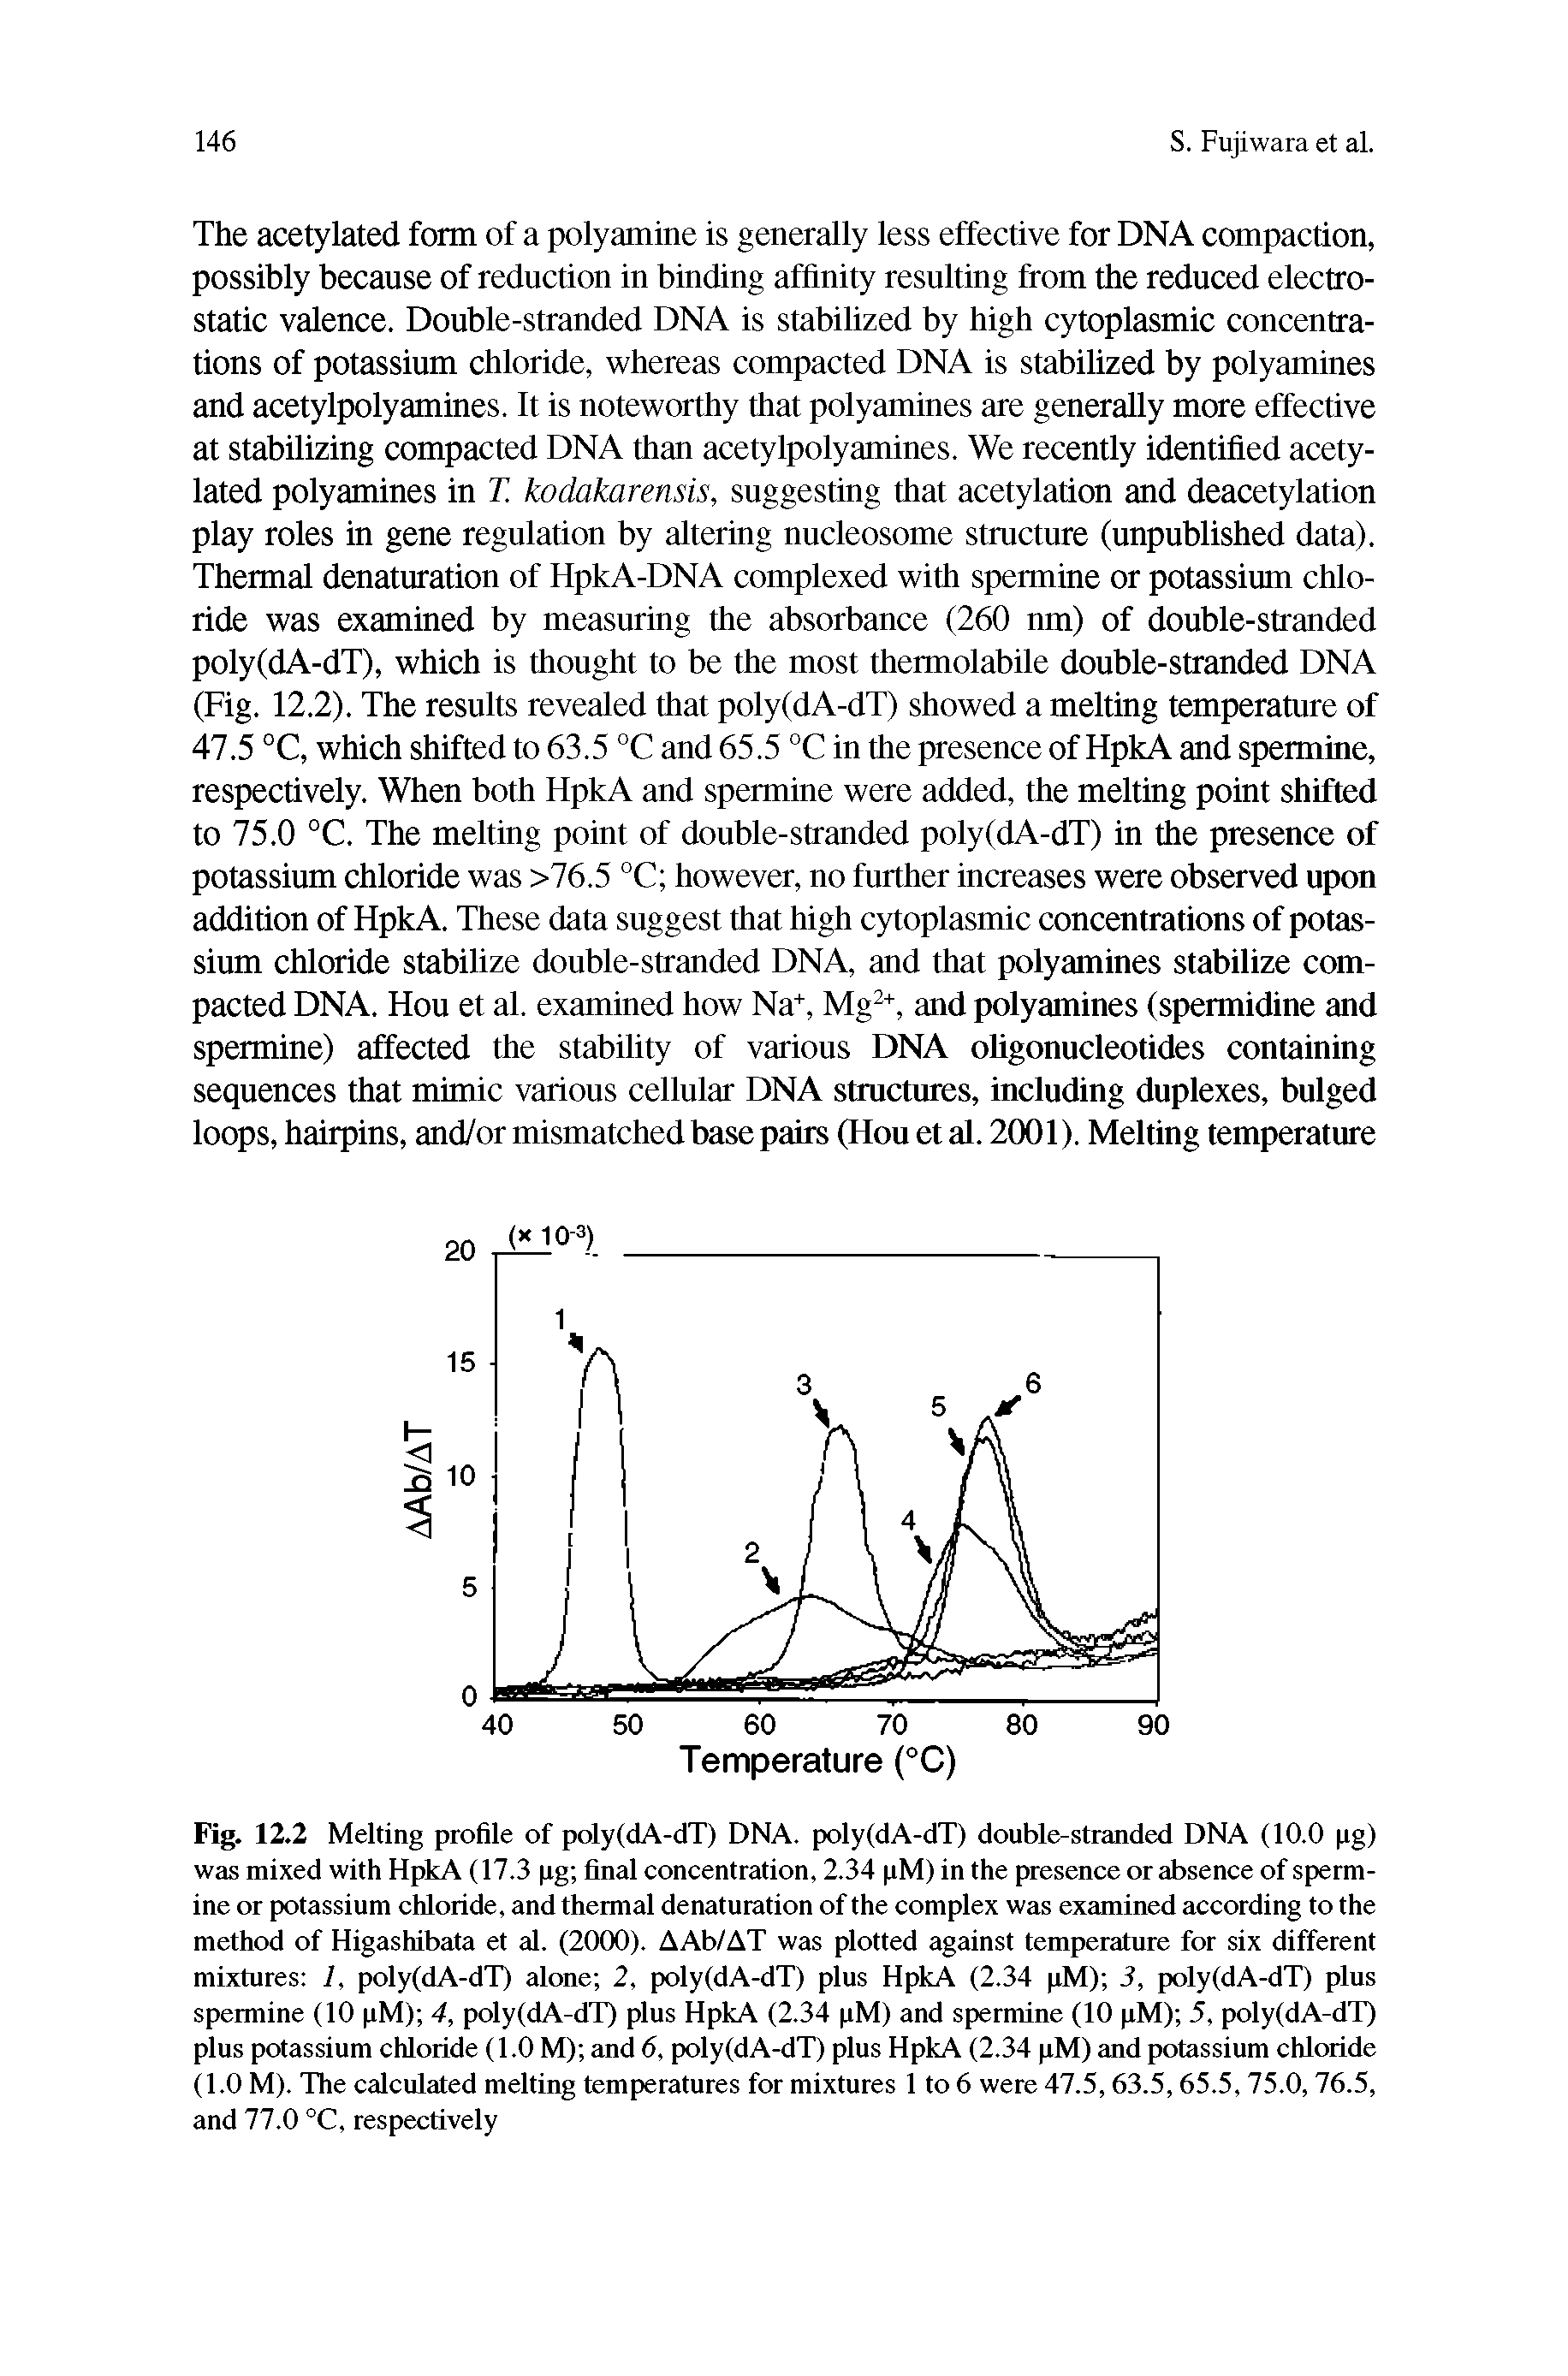 Fig. 12.2 Melting profile of poly(dA-dT) DNA. poly(dA-dT) double-stranded DNA (10.0 pg) was mixed with HpkA (17.3 pg final concentration, 2.34 pM) in the presence or absence of spermine or potassium chloride, and thermal denaturation of the complex was examined according to the method of Higashibata et al. (2000). AAb/AT was plotted against temperature for six different mixtures 1, poly(dA-dT) alone 2, poly(dA-dT) plus HpkA (2.34 pM) 3, poly(dA-dT) plus spermine (10 pM) 4, poly(dA-dT) plus HpkA (2.34 pM) and spermine (10 pM) 5, poly(dA-dT) plus potassium chloride (1.0 M) and 6, poly(dA-dT) plus HpkA (2.34 pM) and potassium chloride (1.0 M). The calculated melting temperatures for mixtures 1 to 6 were 47.5,63.5,65.5,75.0,76.5, and 77.0 °C, respectively...